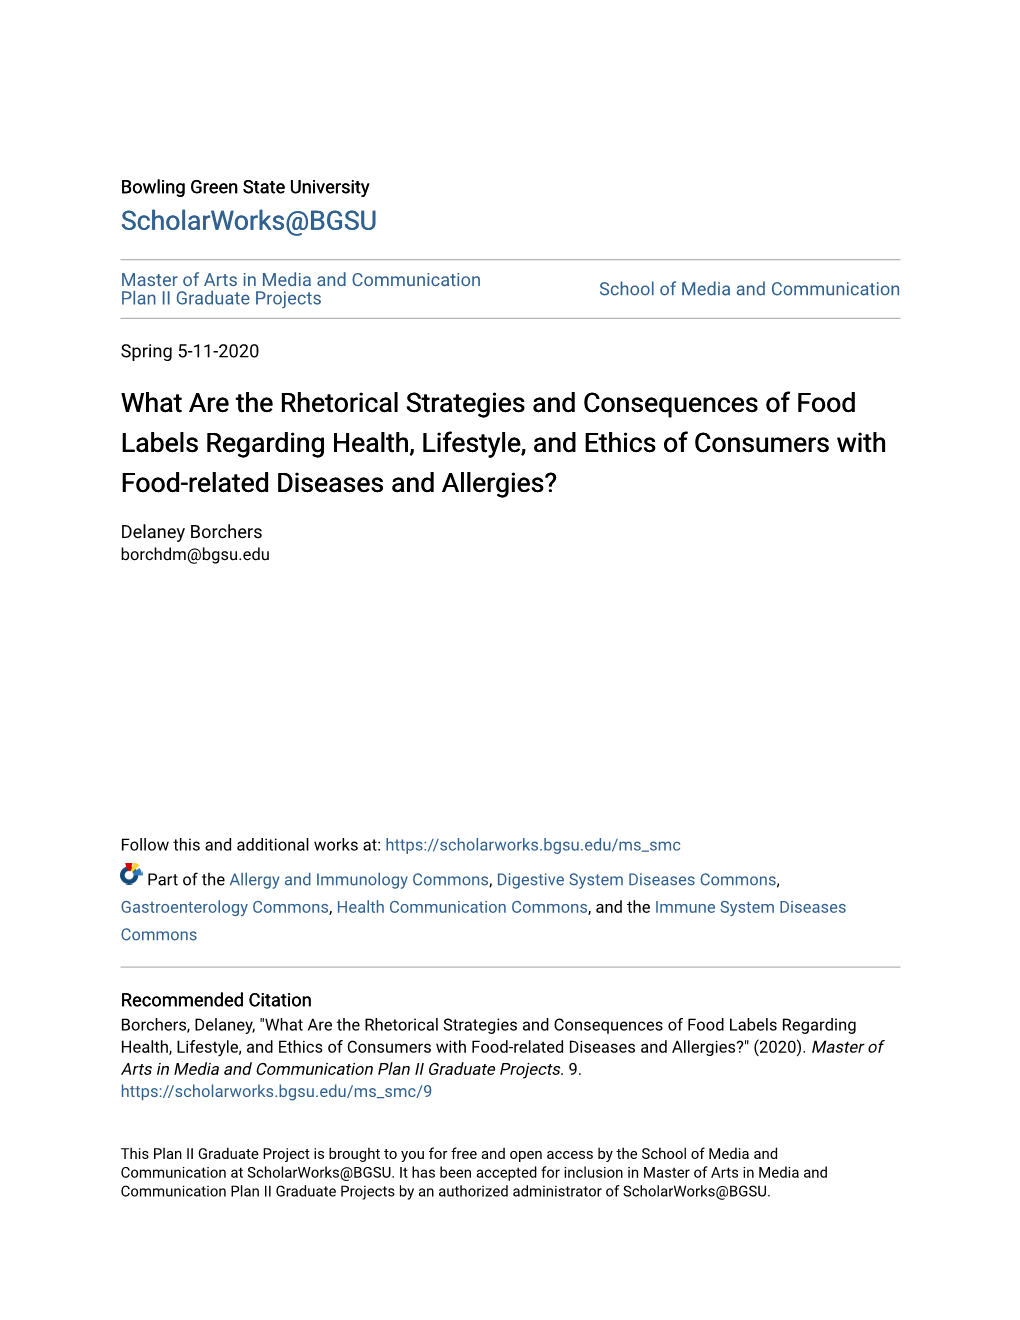 What Are the Rhetorical Strategies and Consequences of Food Labels Regarding Health, Lifestyle, and Ethics of Consumers with Food-Related Diseases and Allergies?